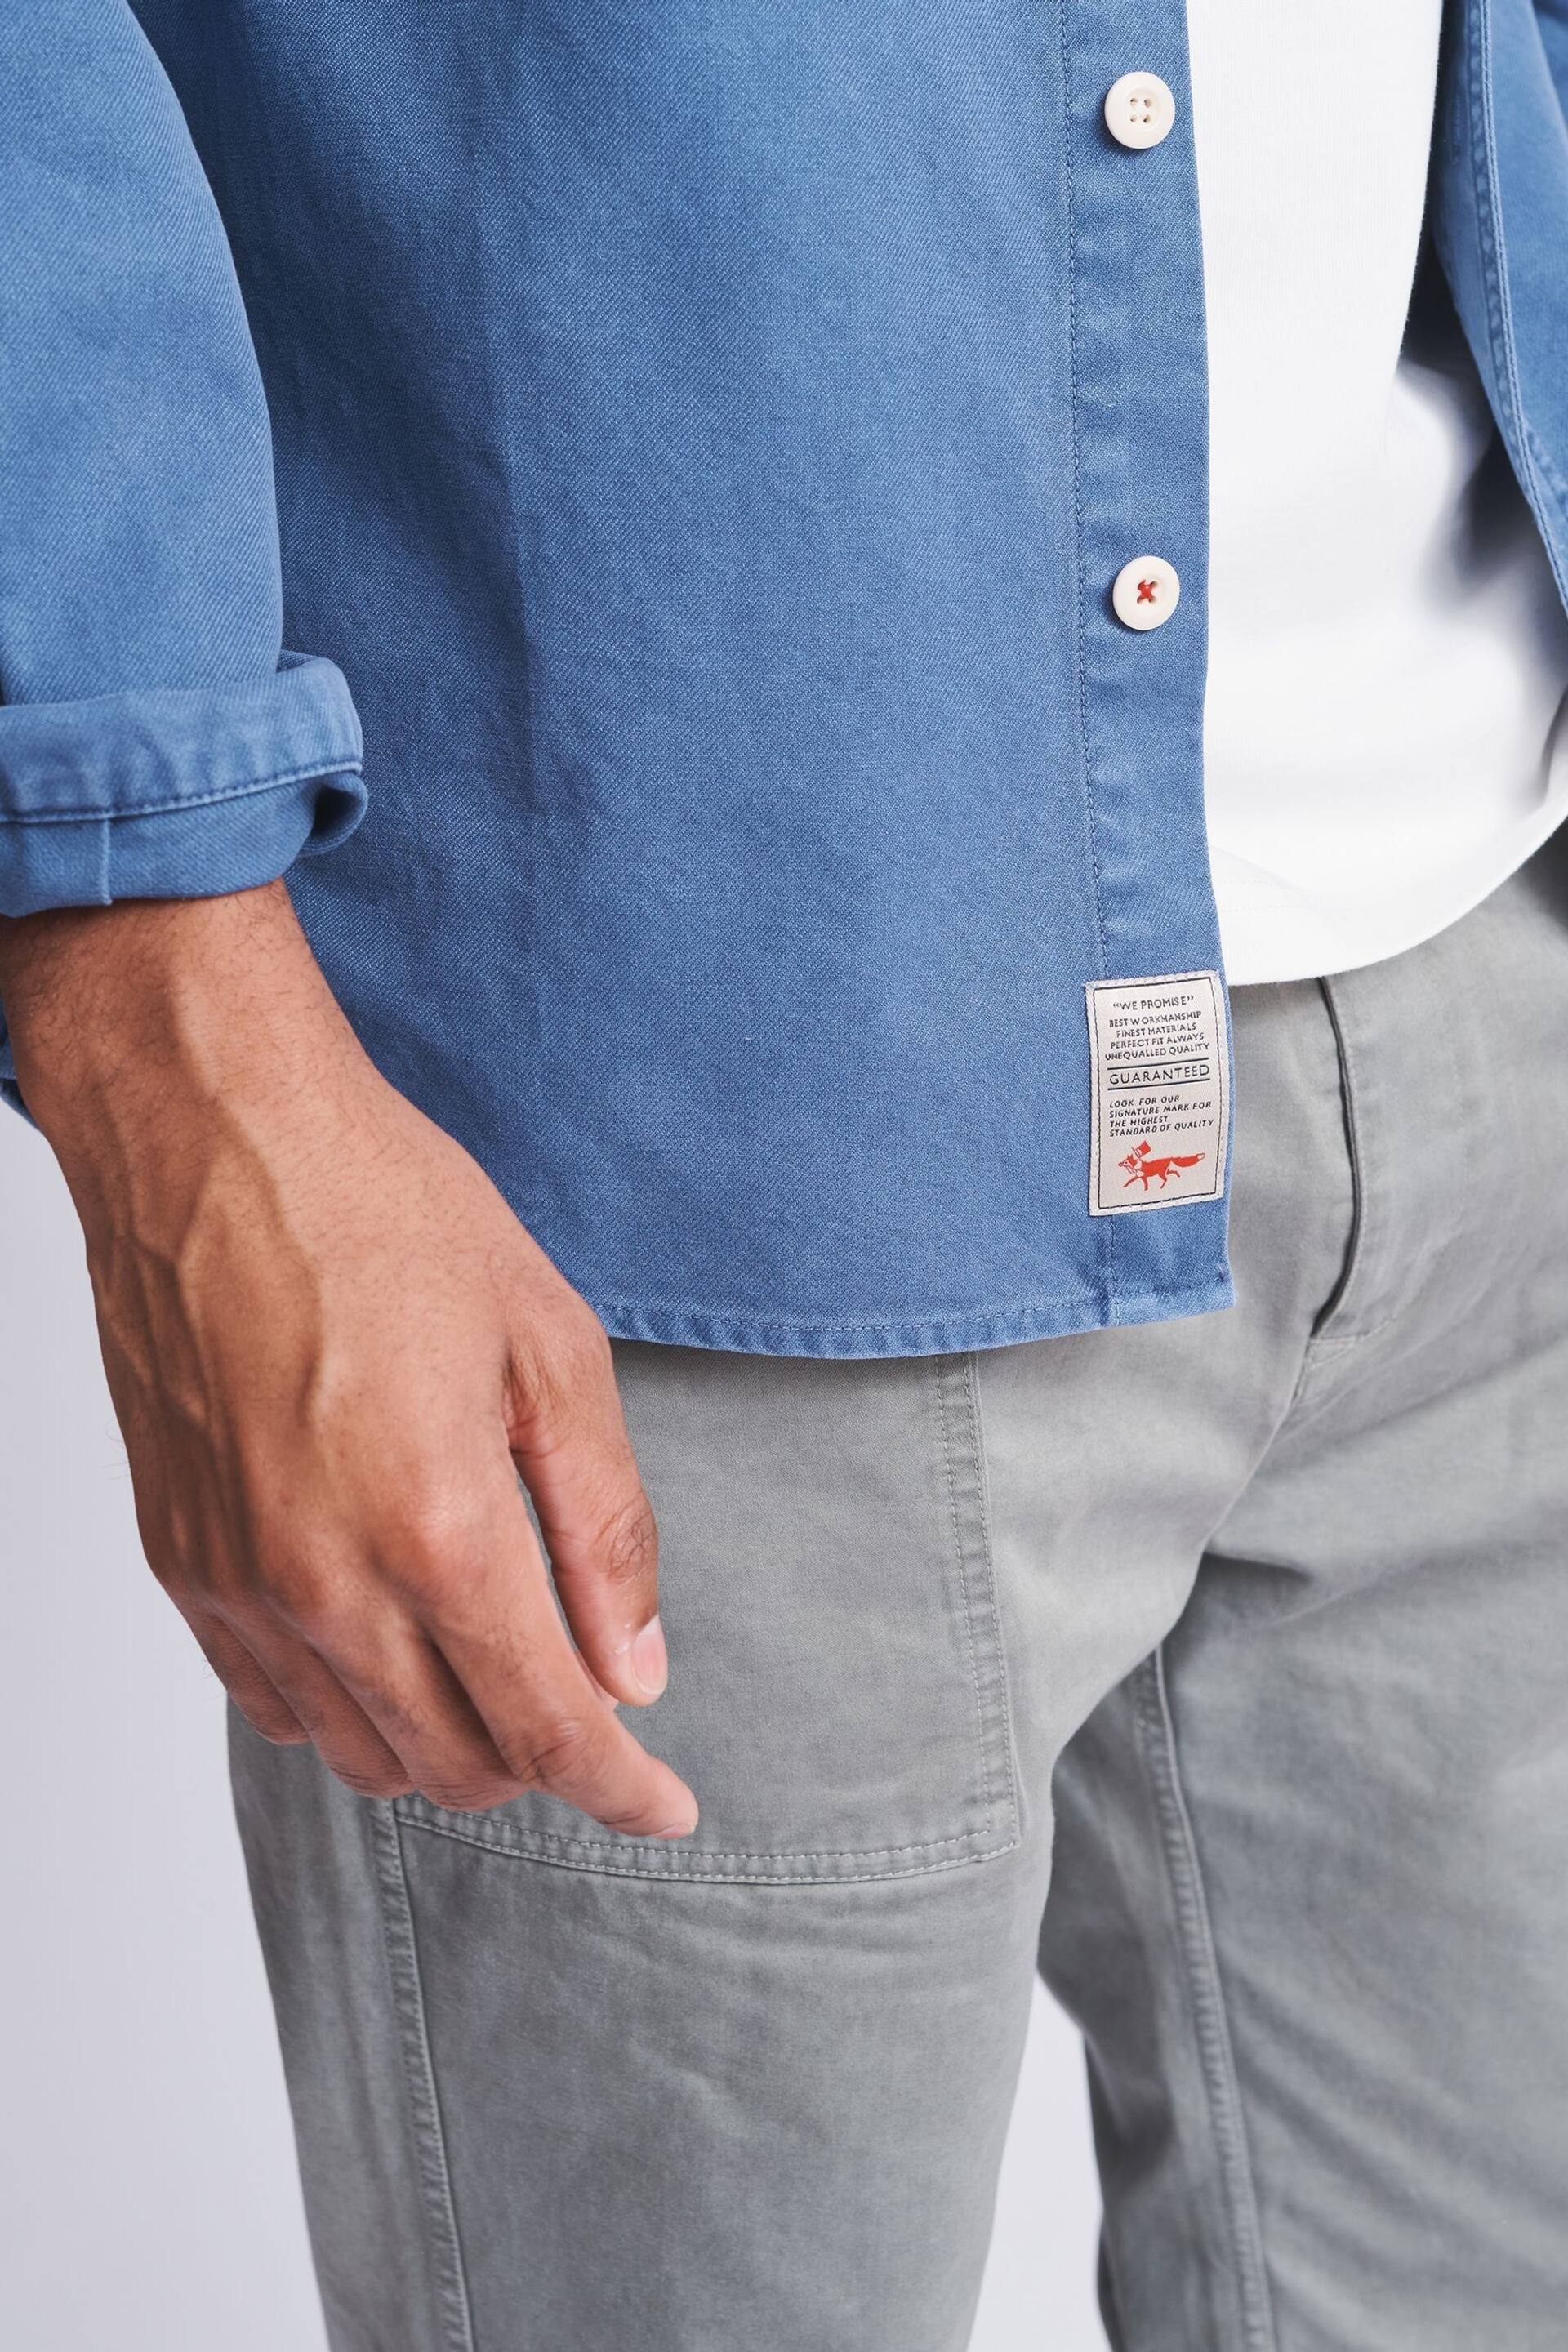 Aubin Blue Dovedale Cotton Twill Overshirt - Image 5 of 7